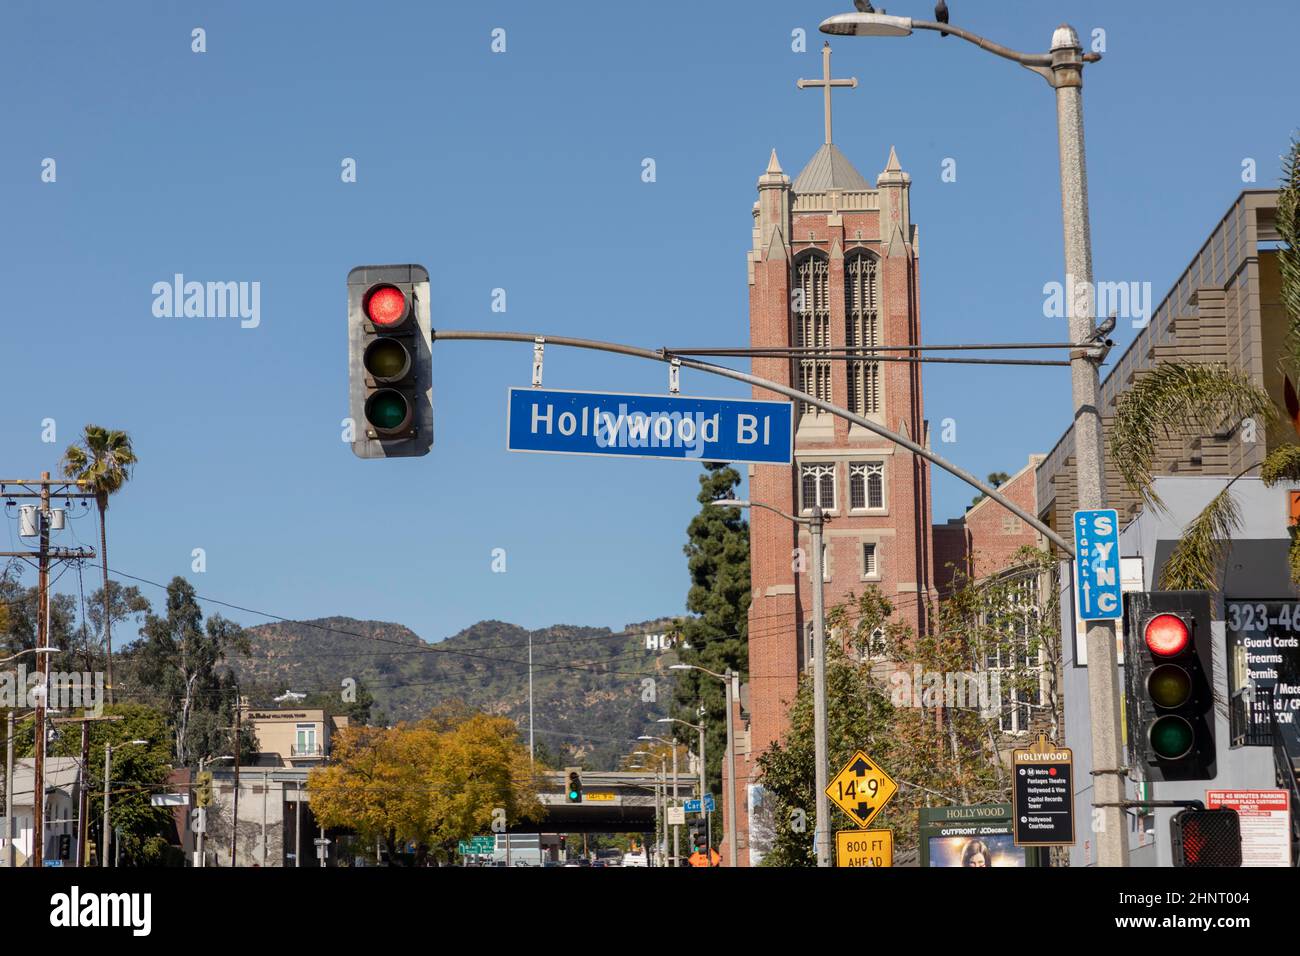 street sign Hollywood BL in Los Angeles Stock Photo